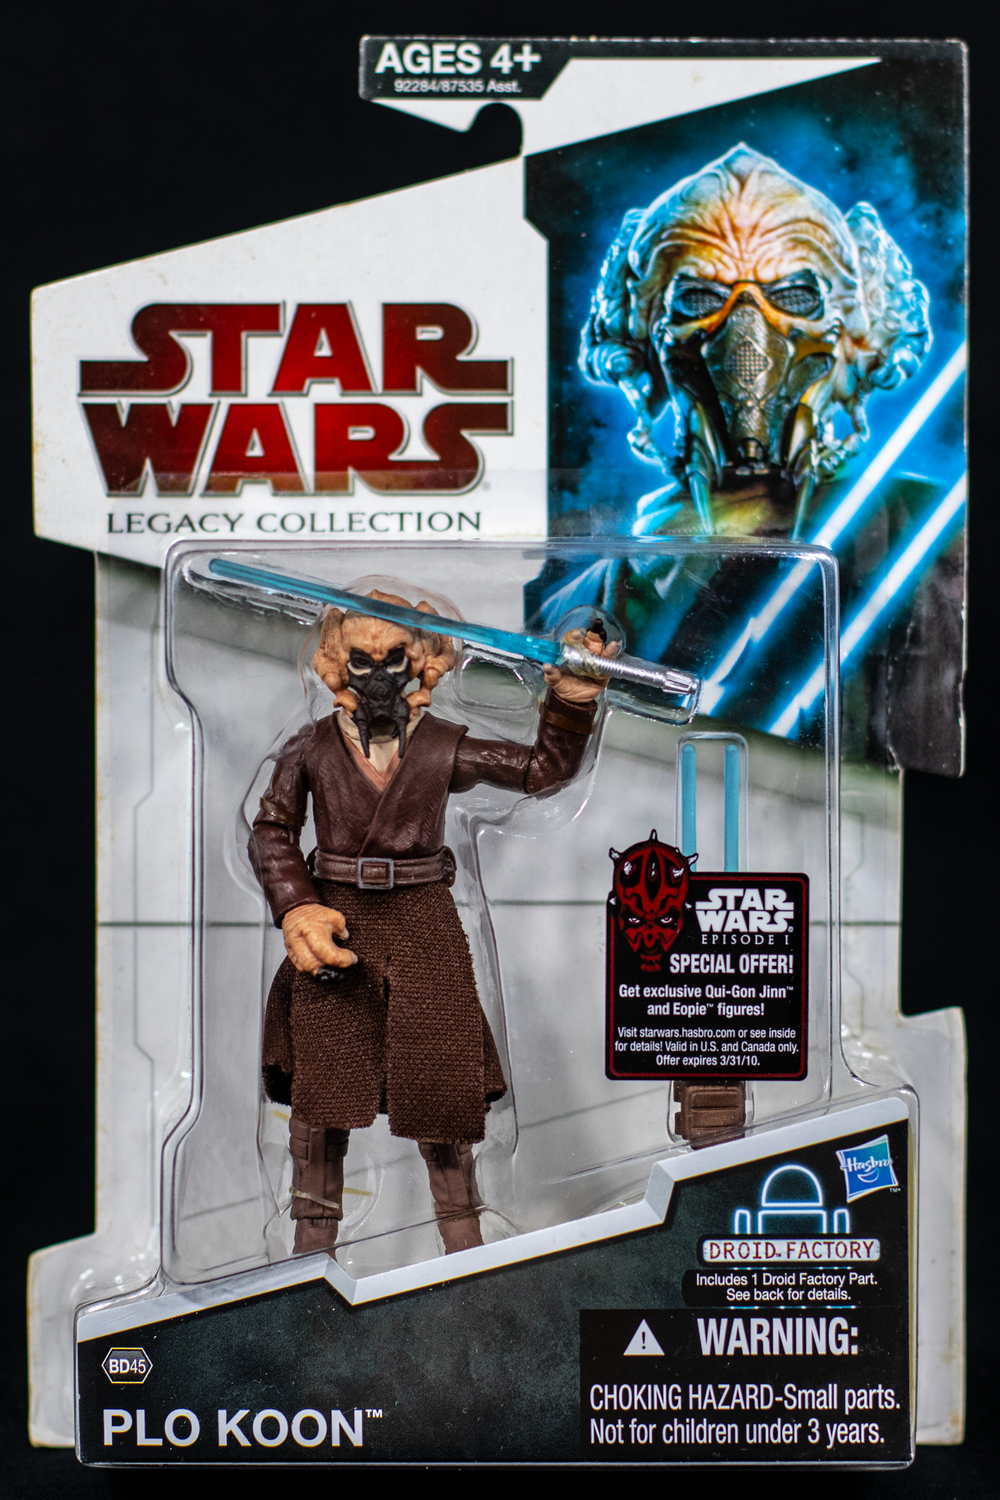 Star Wars: Legacy Collection "Plo Koon"